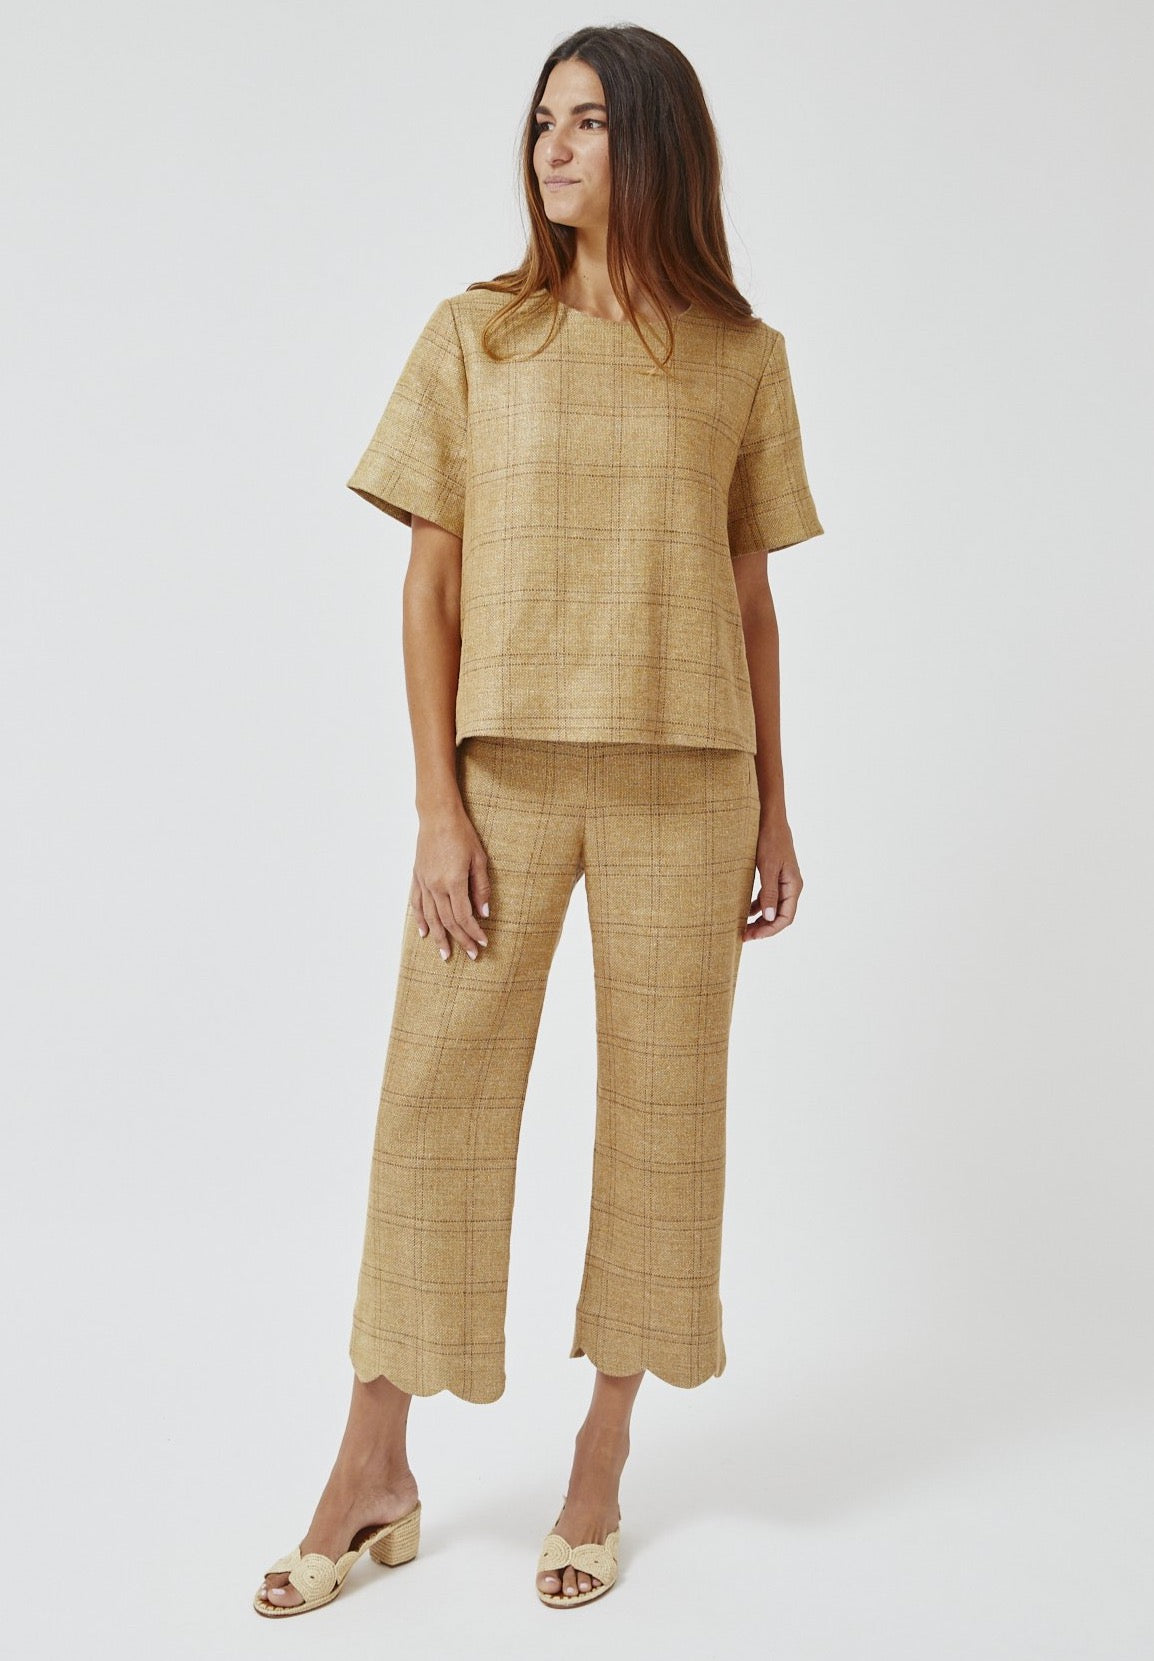 THE SCALLOP PANT in NATURAL WINDOWPANE BASKETWEAVE LINEN